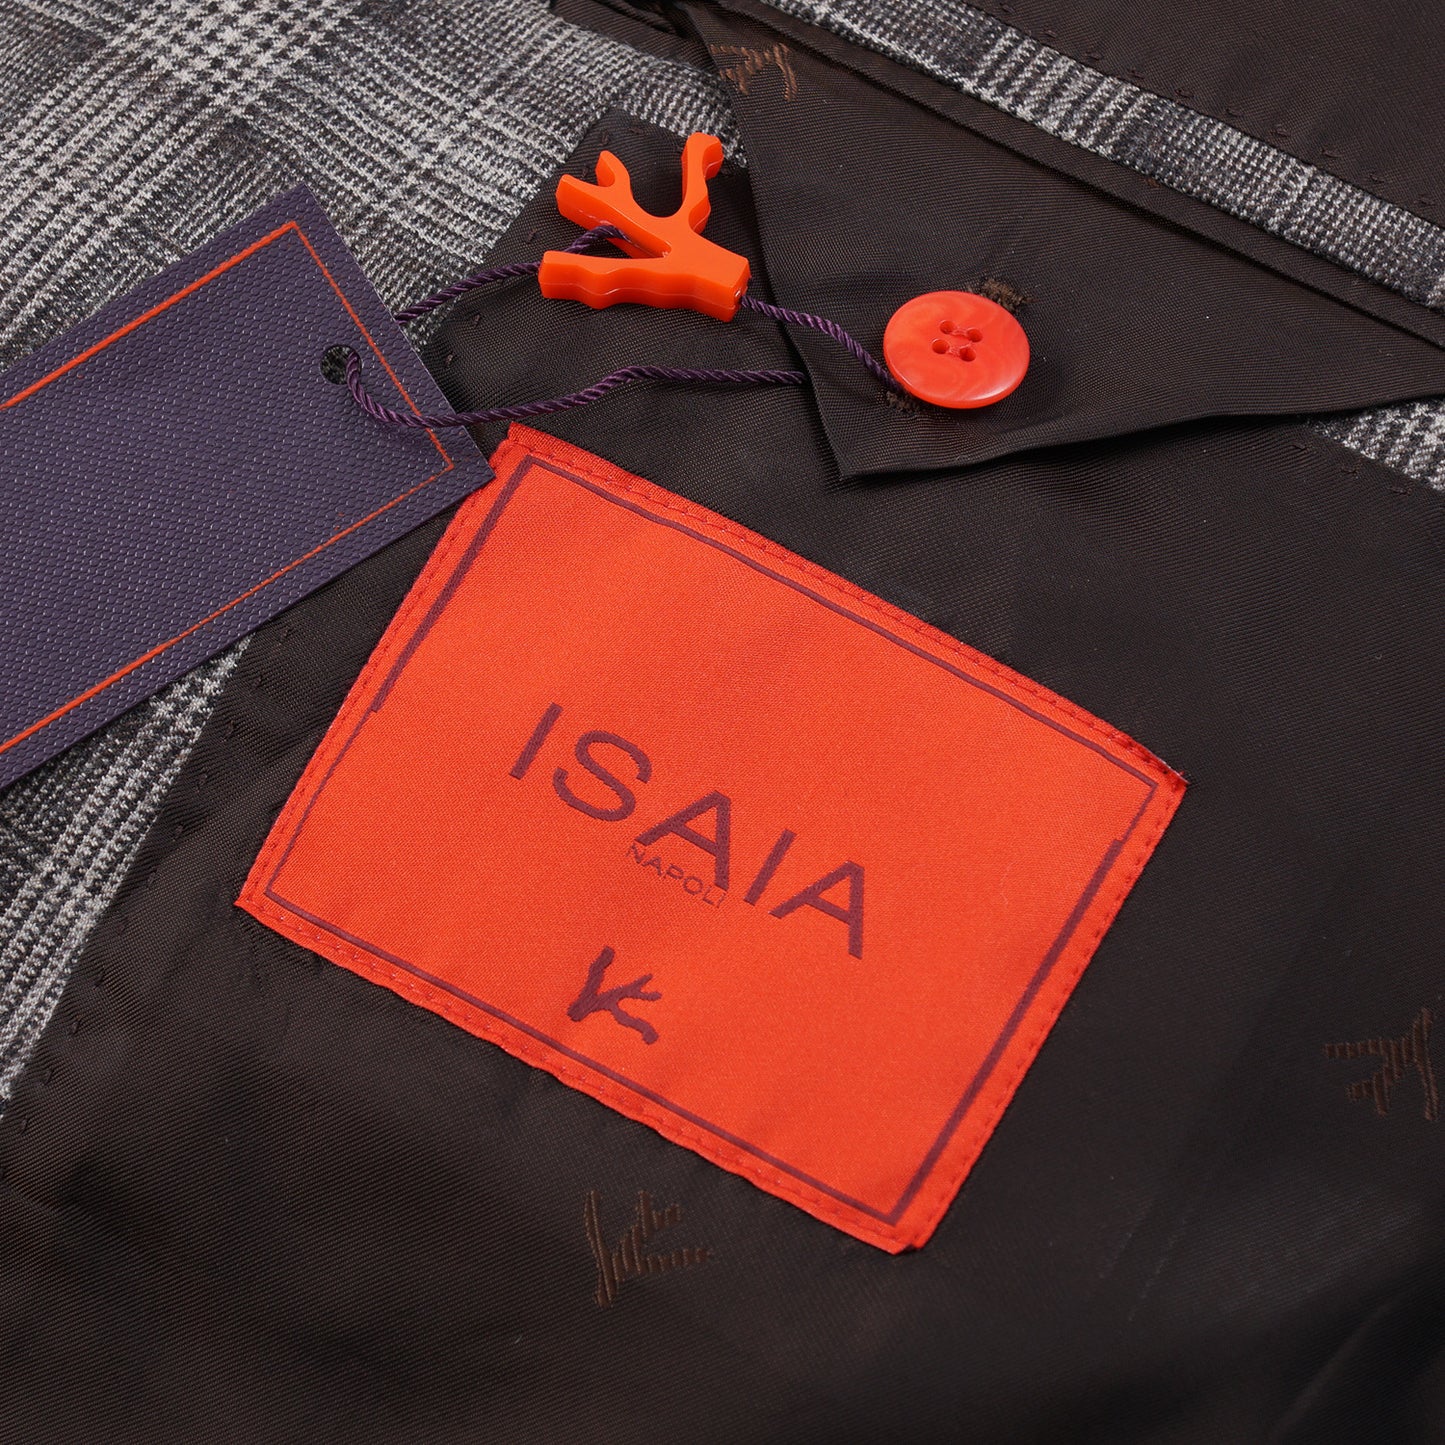 Isaia Slim-Fit Shadow Check Wool Suit - Top Shelf Apparel